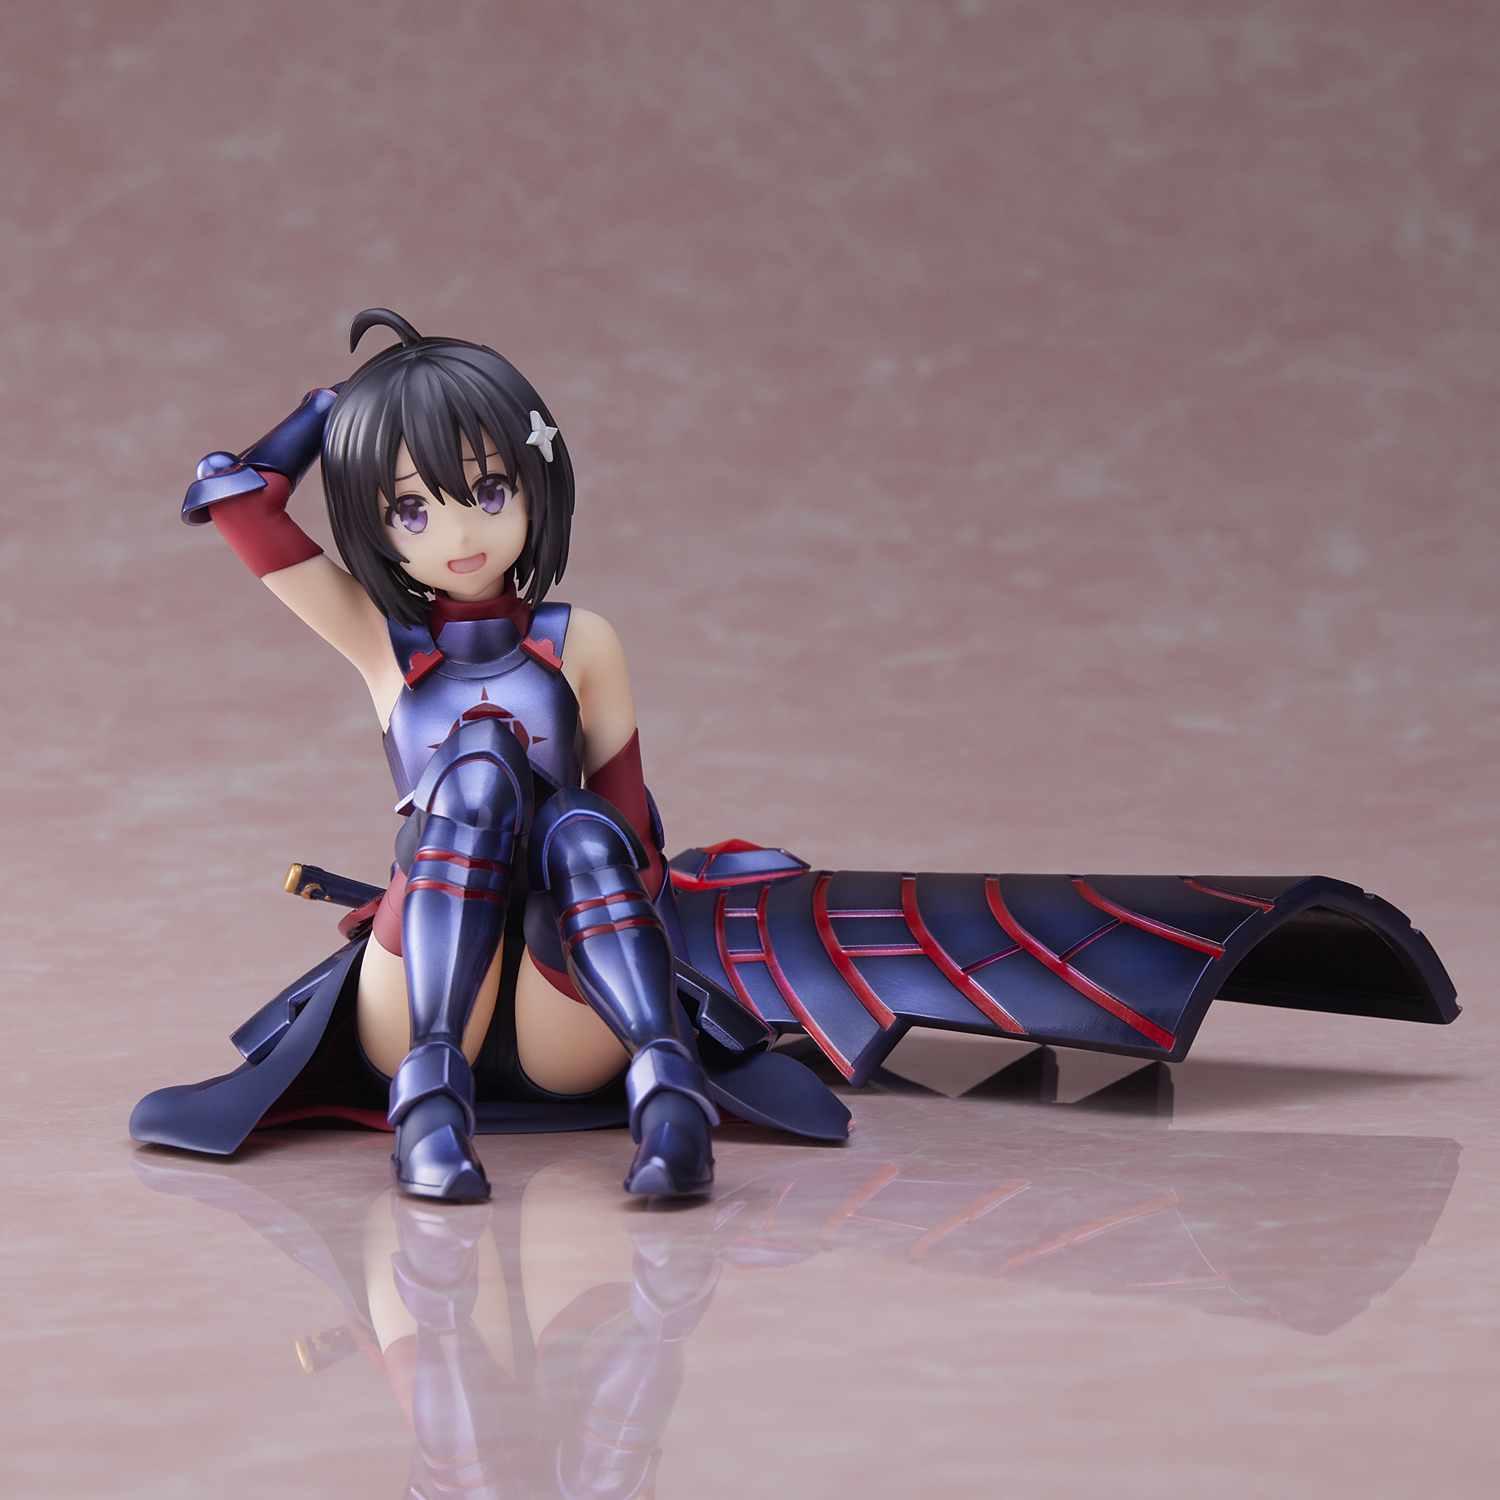 Figurine BOFURI: I Don't Want to Get Hurt, so I'll Max Out My Defense - Maple - Union Creative